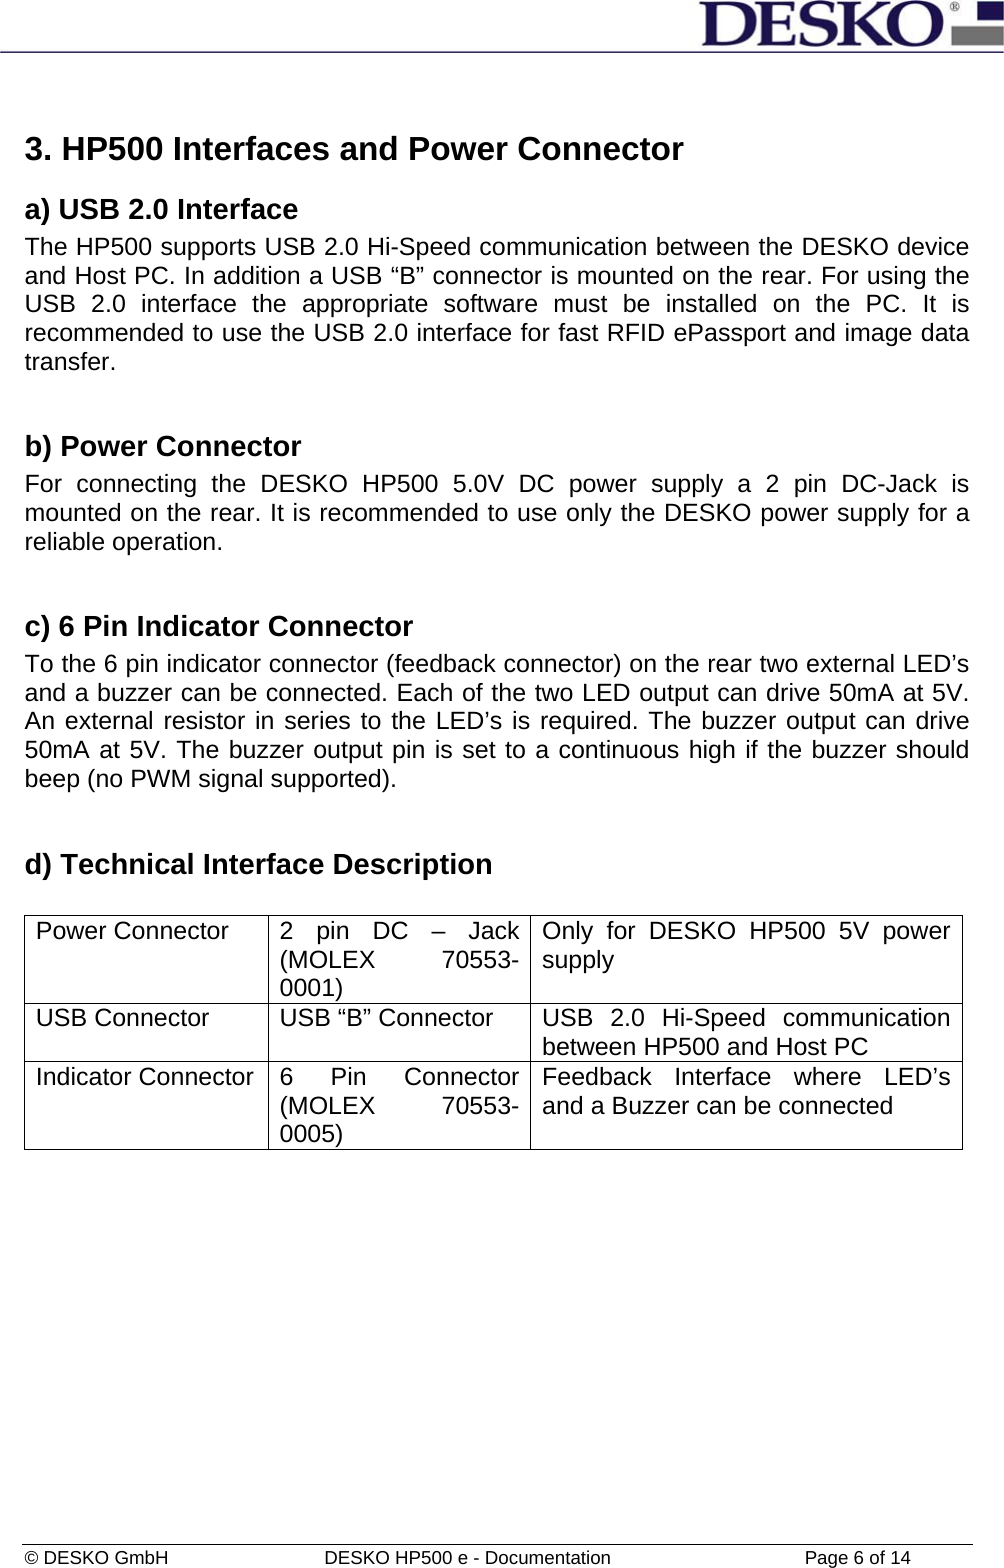  © DESKO GmbH   DESKO HP500 e - Documentation                  Page 6 of 14  3. HP500 Interfaces and Power Connector  a) USB 2.0 Interface The HP500 supports USB 2.0 Hi-Speed communication between the DESKO device and Host PC. In addition a USB “B” connector is mounted on the rear. For using the USB 2.0 interface the appropriate software must be installed on the PC. It is recommended to use the USB 2.0 interface for fast RFID ePassport and image data transfer.  b) Power Connector For connecting the DESKO HP500 5.0V DC power supply a 2 pin DC-Jack is mounted on the rear. It is recommended to use only the DESKO power supply for a reliable operation.  c) 6 Pin Indicator Connector To the 6 pin indicator connector (feedback connector) on the rear two external LED’s and a buzzer can be connected. Each of the two LED output can drive 50mA at 5V. An external resistor in series to the LED’s is required. The buzzer output can drive 50mA at 5V. The buzzer output pin is set to a continuous high if the buzzer should beep (no PWM signal supported).  d) Technical Interface Description  Power Connector  2 pin DC – Jack (MOLEX 70553-0001) Only for DESKO HP500 5V power supply  USB Connector  USB “B” Connector  USB 2.0 Hi-Speed communication between HP500 and Host PC  Indicator Connector  6  Pin  Connector (MOLEX 70553-0005) Feedback Interface where LED’s and a Buzzer can be connected  